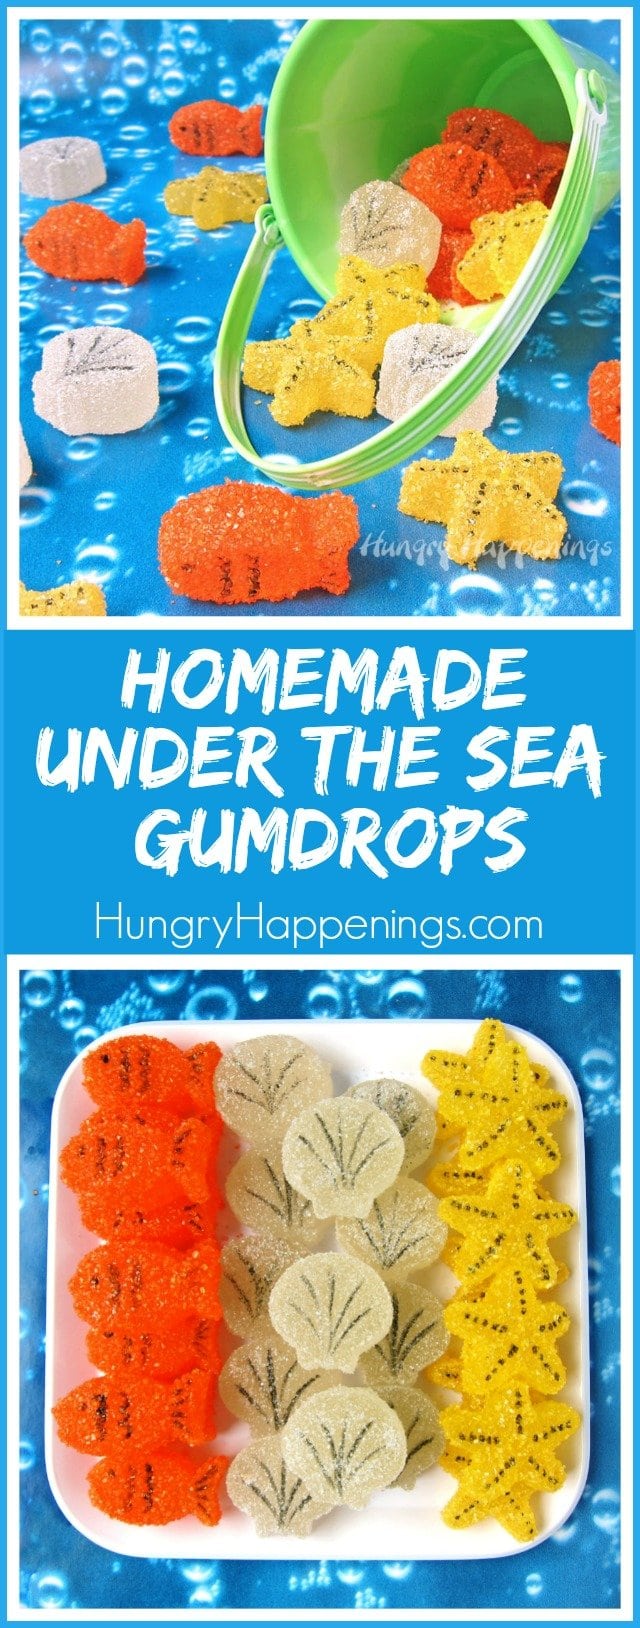 Make homemade gumdrops into sweet little sea creatures. These Homemade Under the Sea Gumdrops can be made into Goldfish, Starfish, and Sea Shells. 